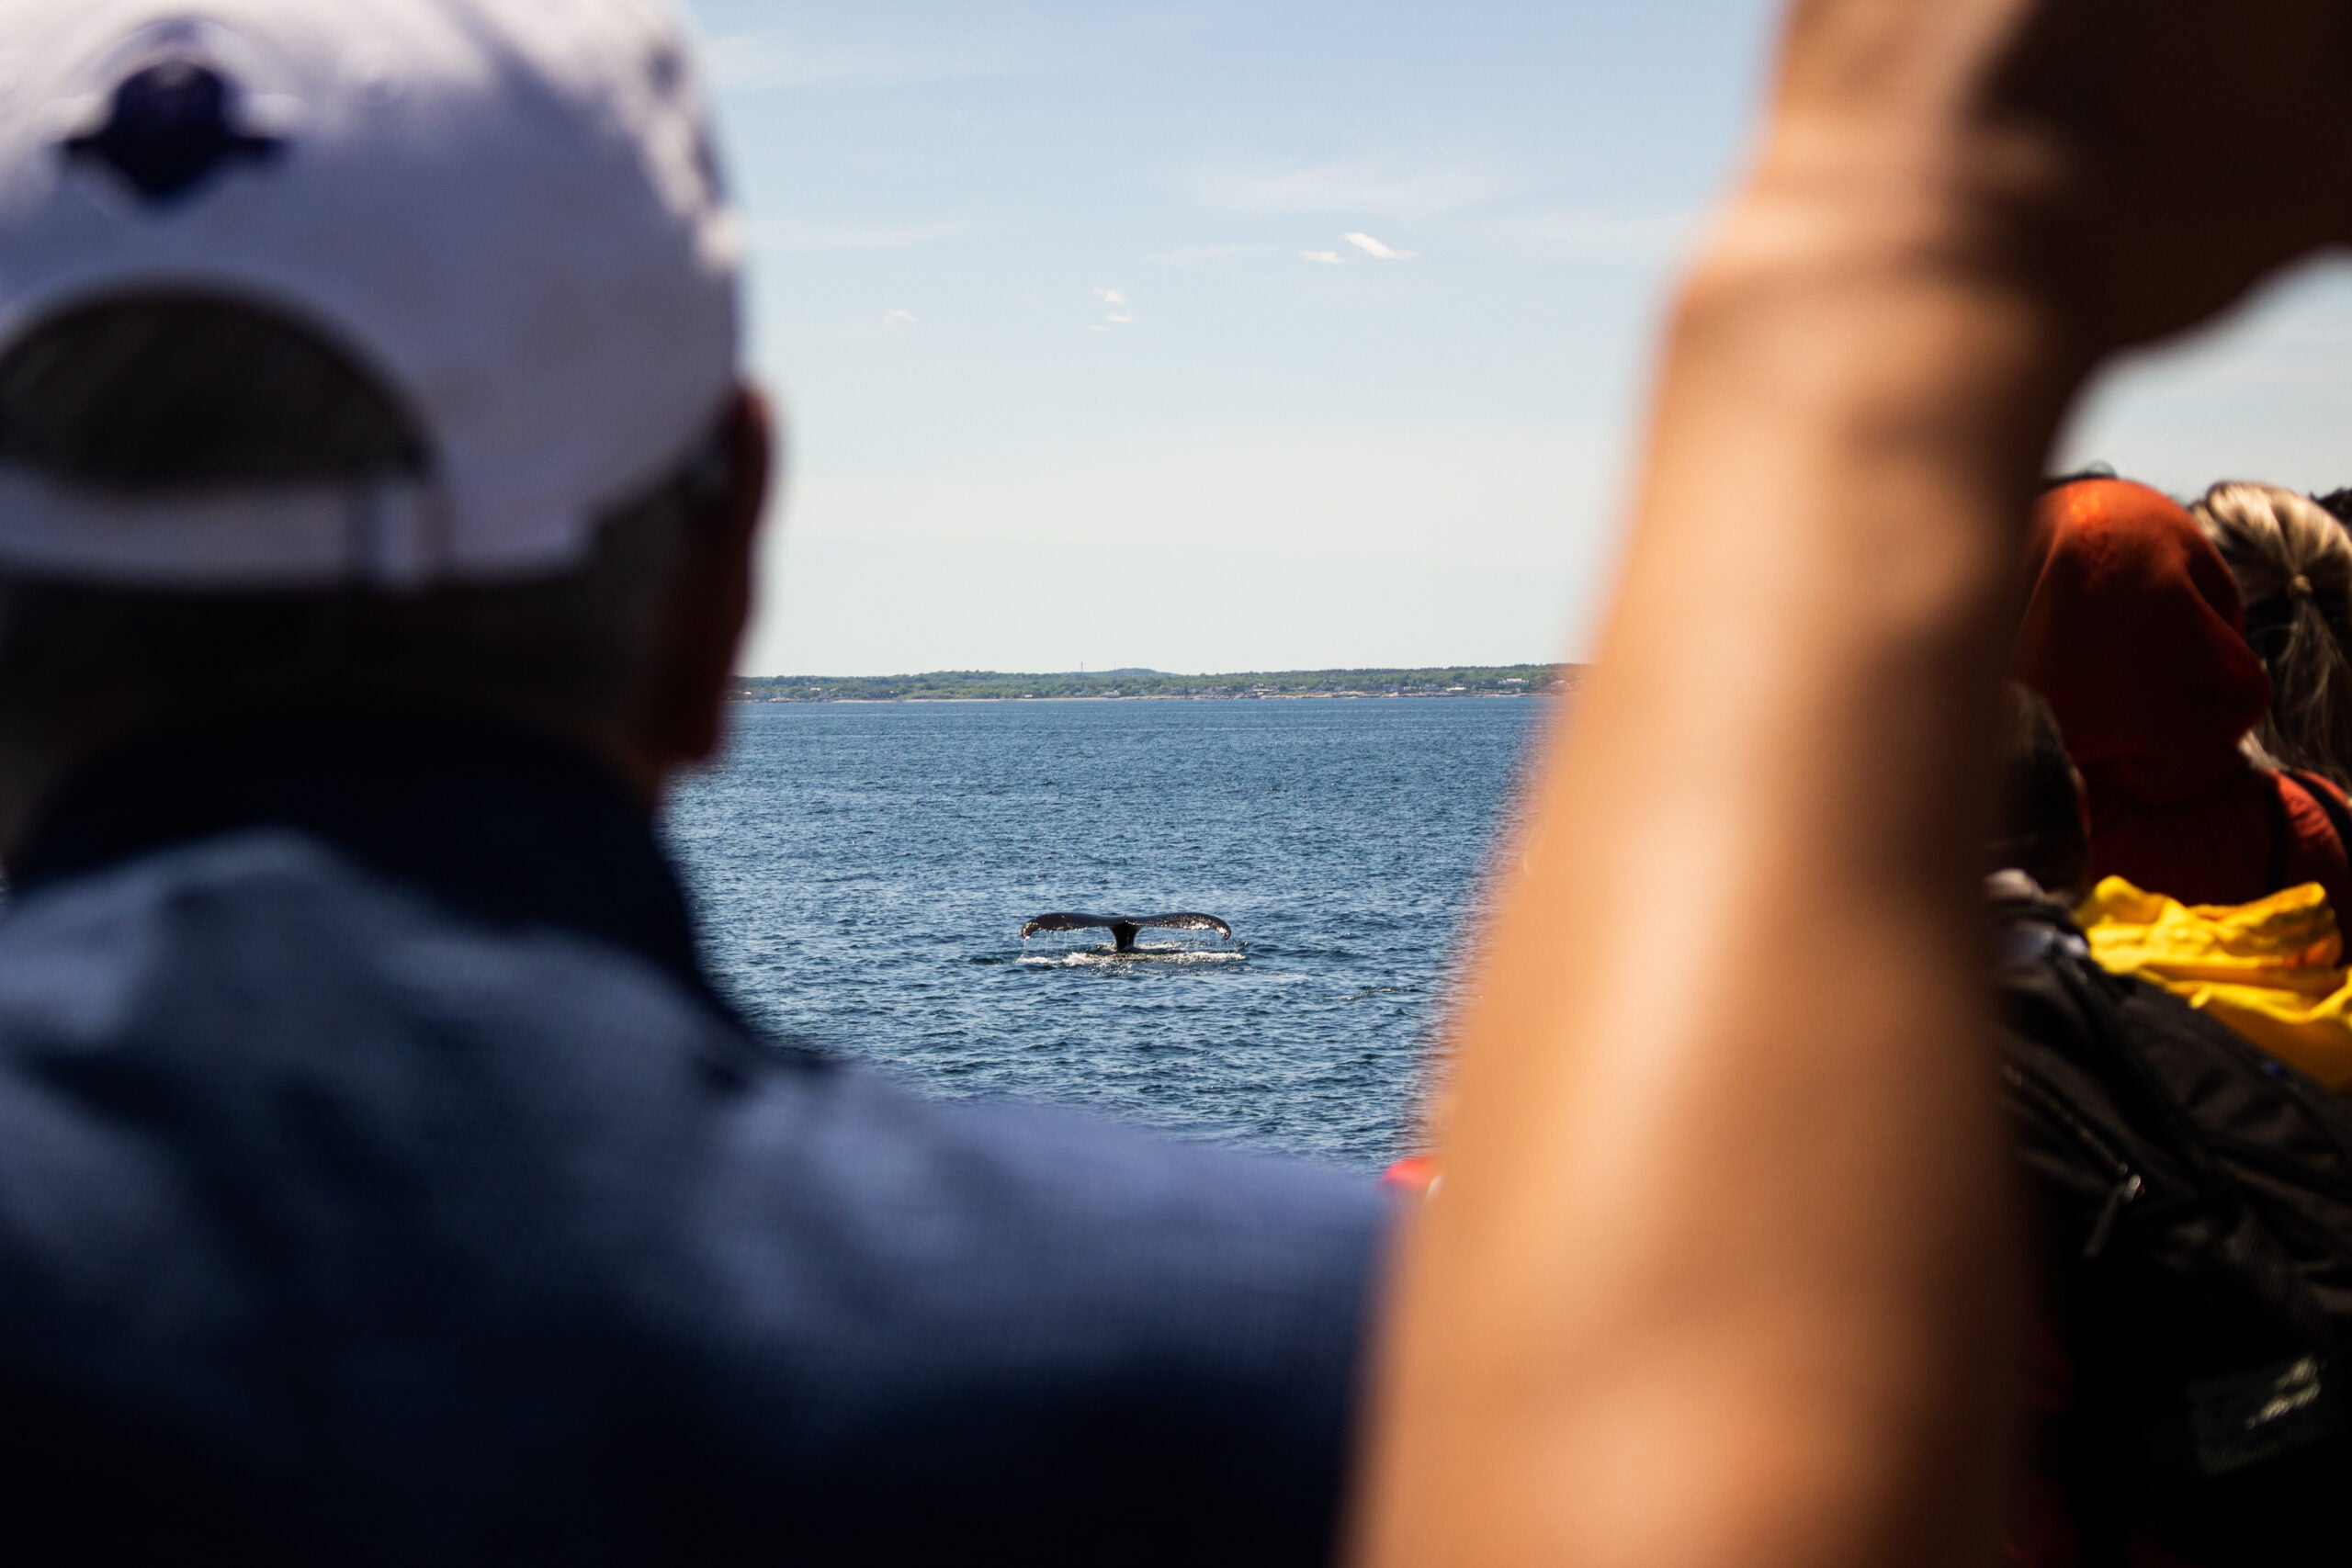 A fluking dive, seen through the crowd of other whale watchers hoping to catch a glimpse. 